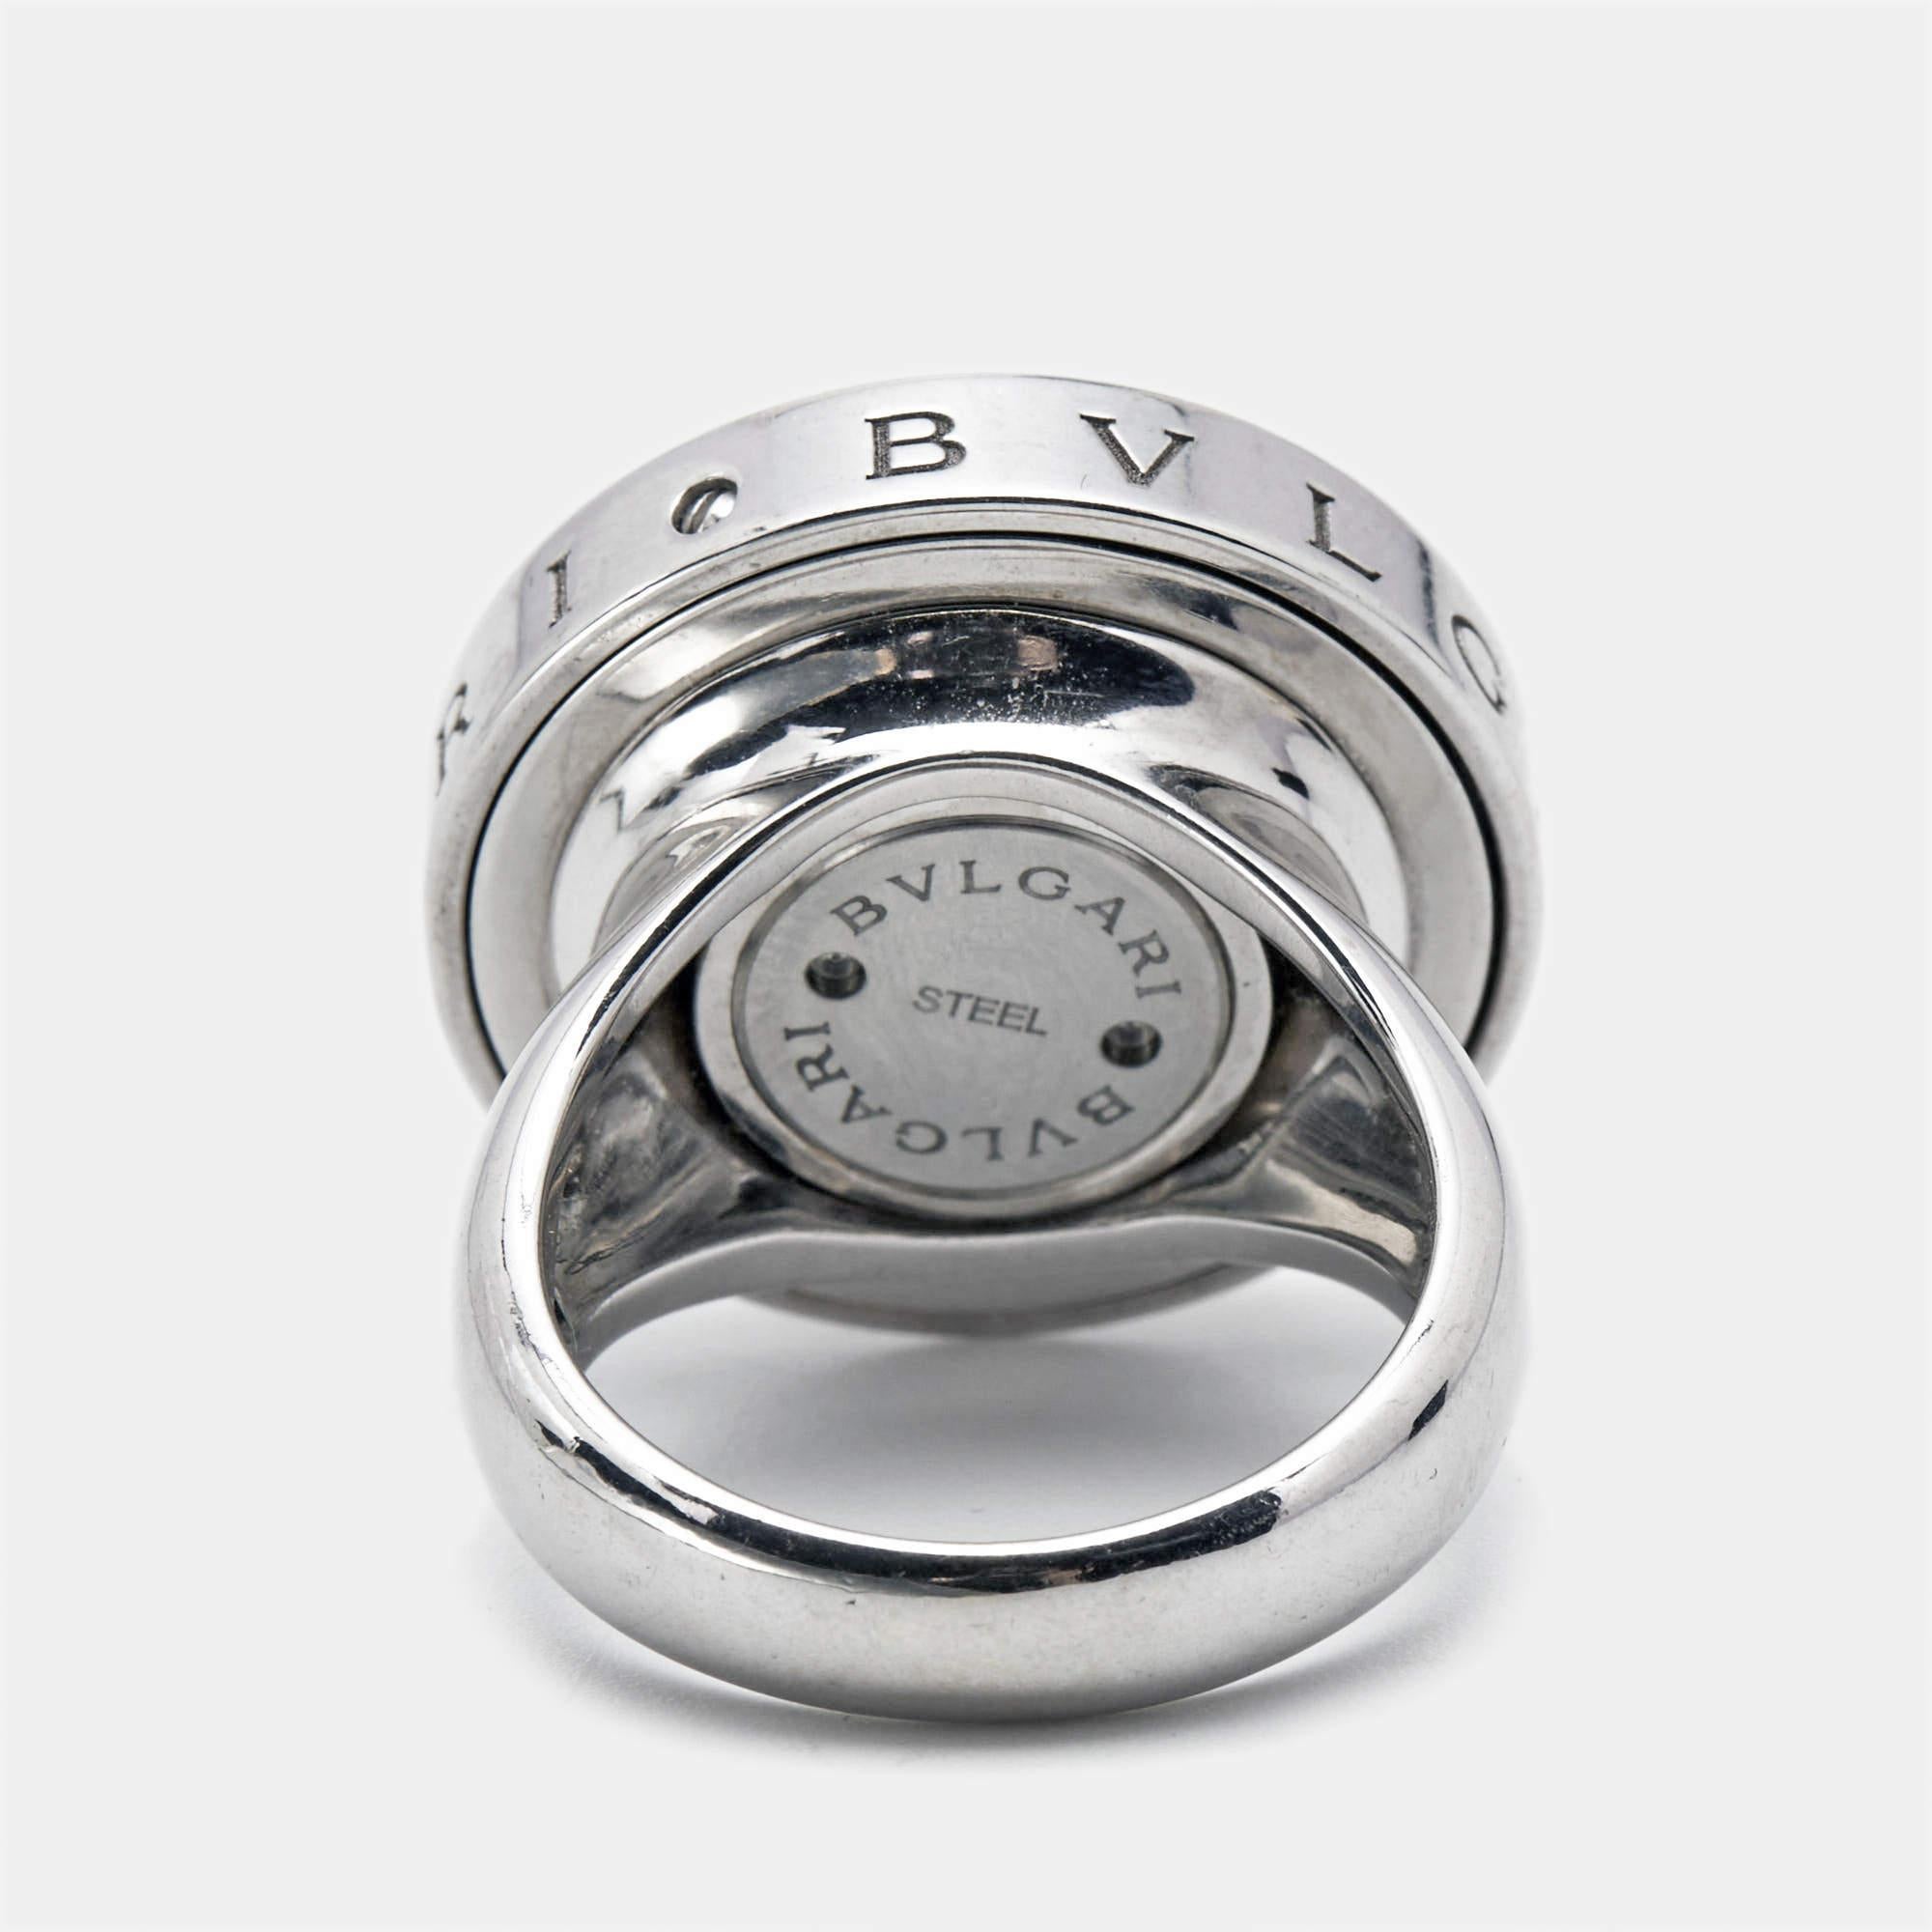 Experience the epitome of luxury and craftsmanship with this meticulously designed Bvlgari ring. Its timeless elegance and exceptional detailing make it a statement piece for any occasion.

Includes: Original Box, Original Case (Damaged);